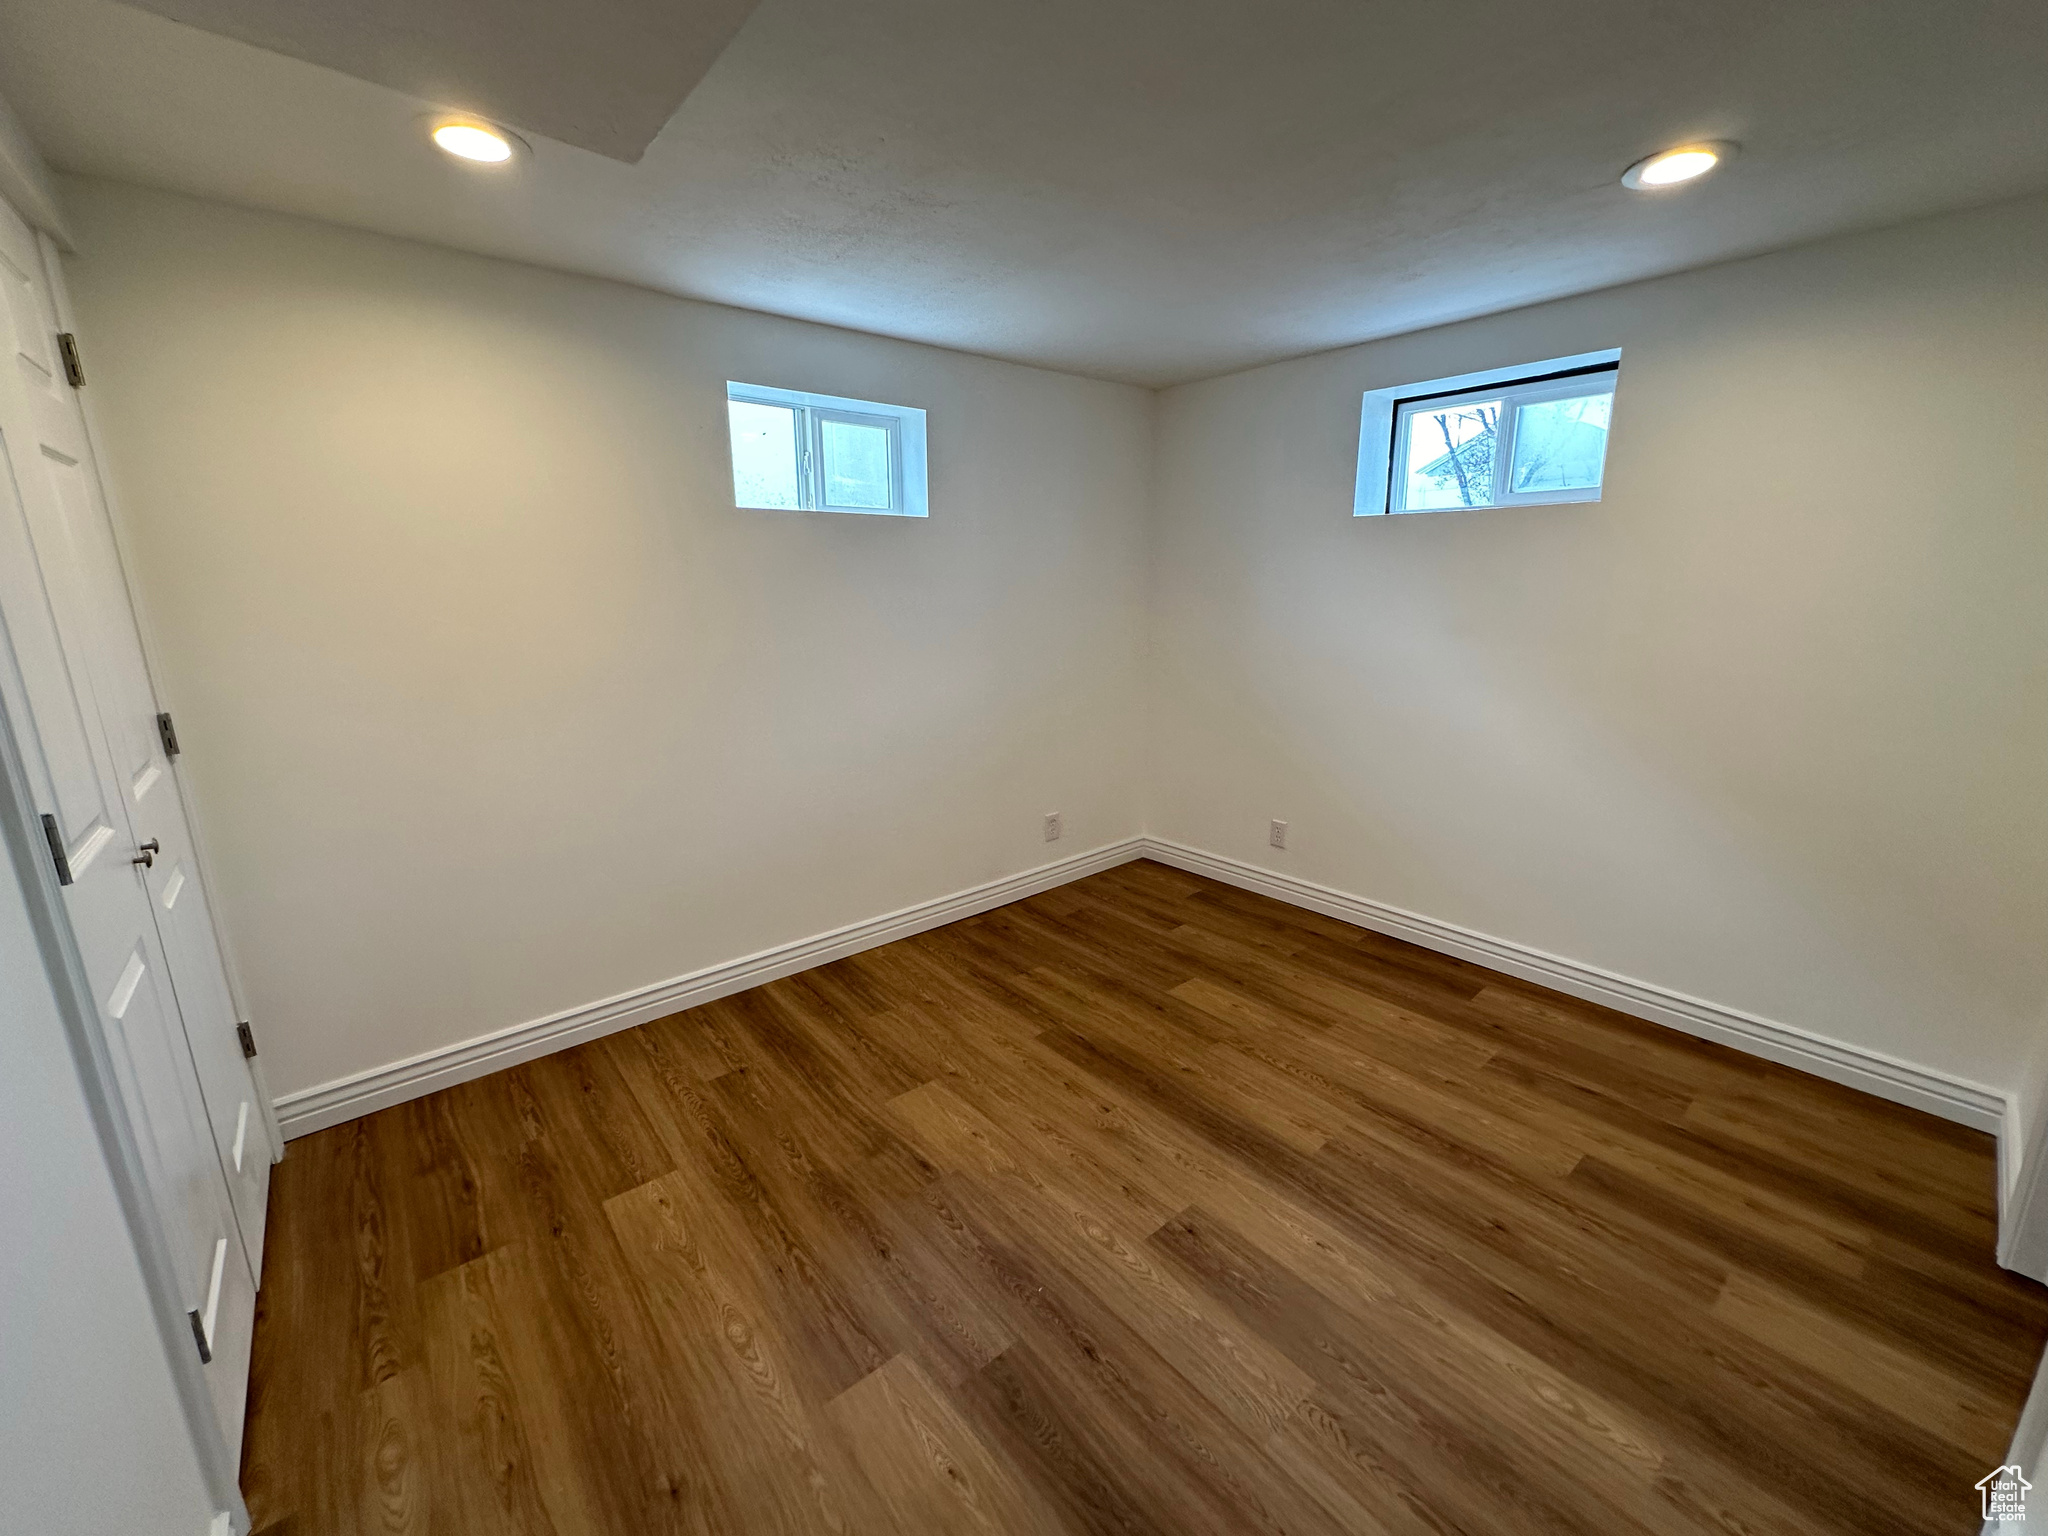 Unfurnished room featuring a wealth of natural light and dark hardwood / wood-style flooring